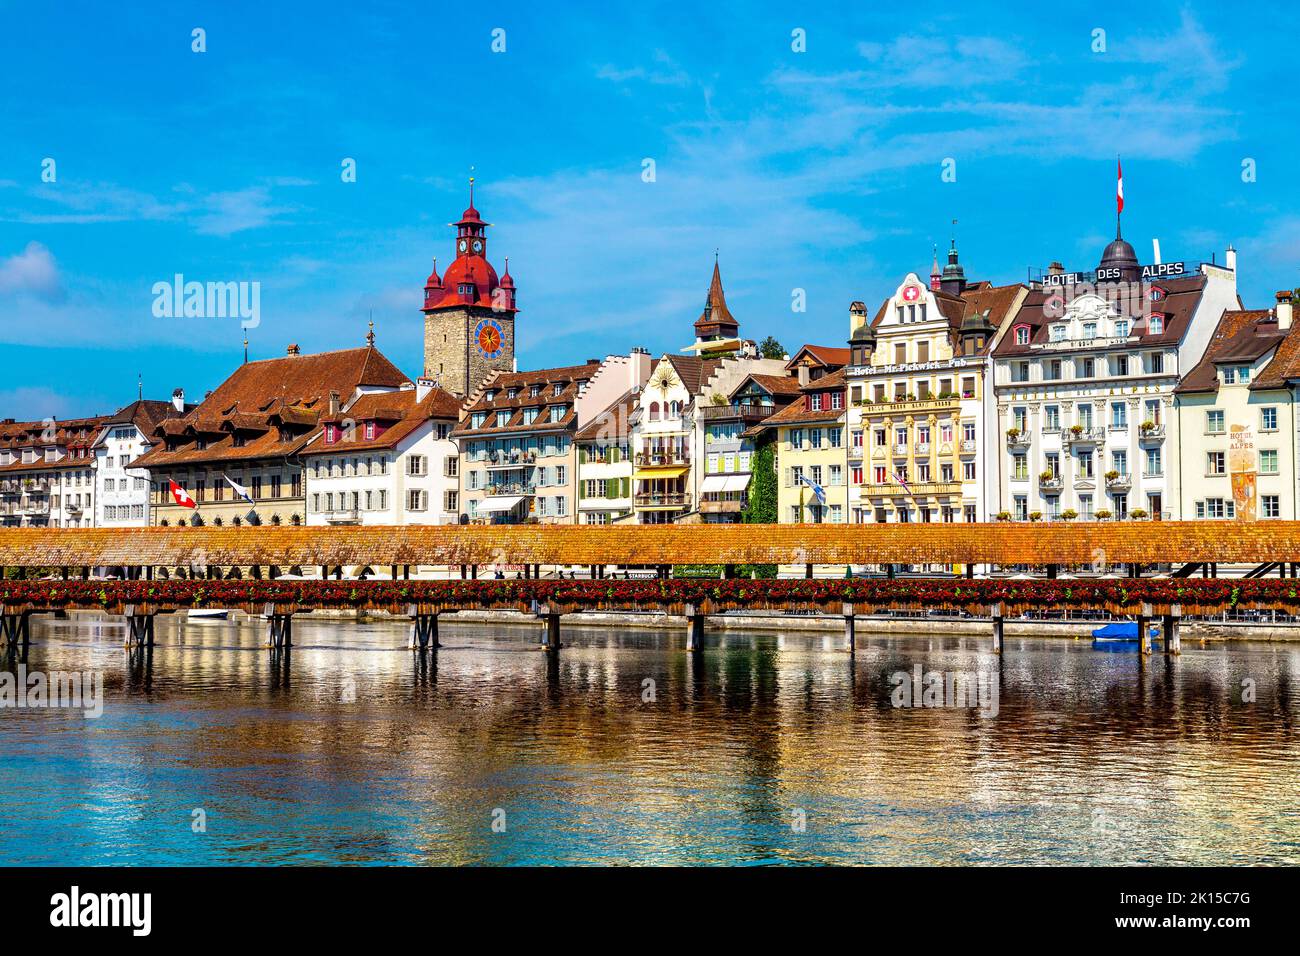 View of houses along the bank of River Russ and the wooden Chapel Bridge (Kapellbrücke), Lucerne, Switzerland Stock Photo